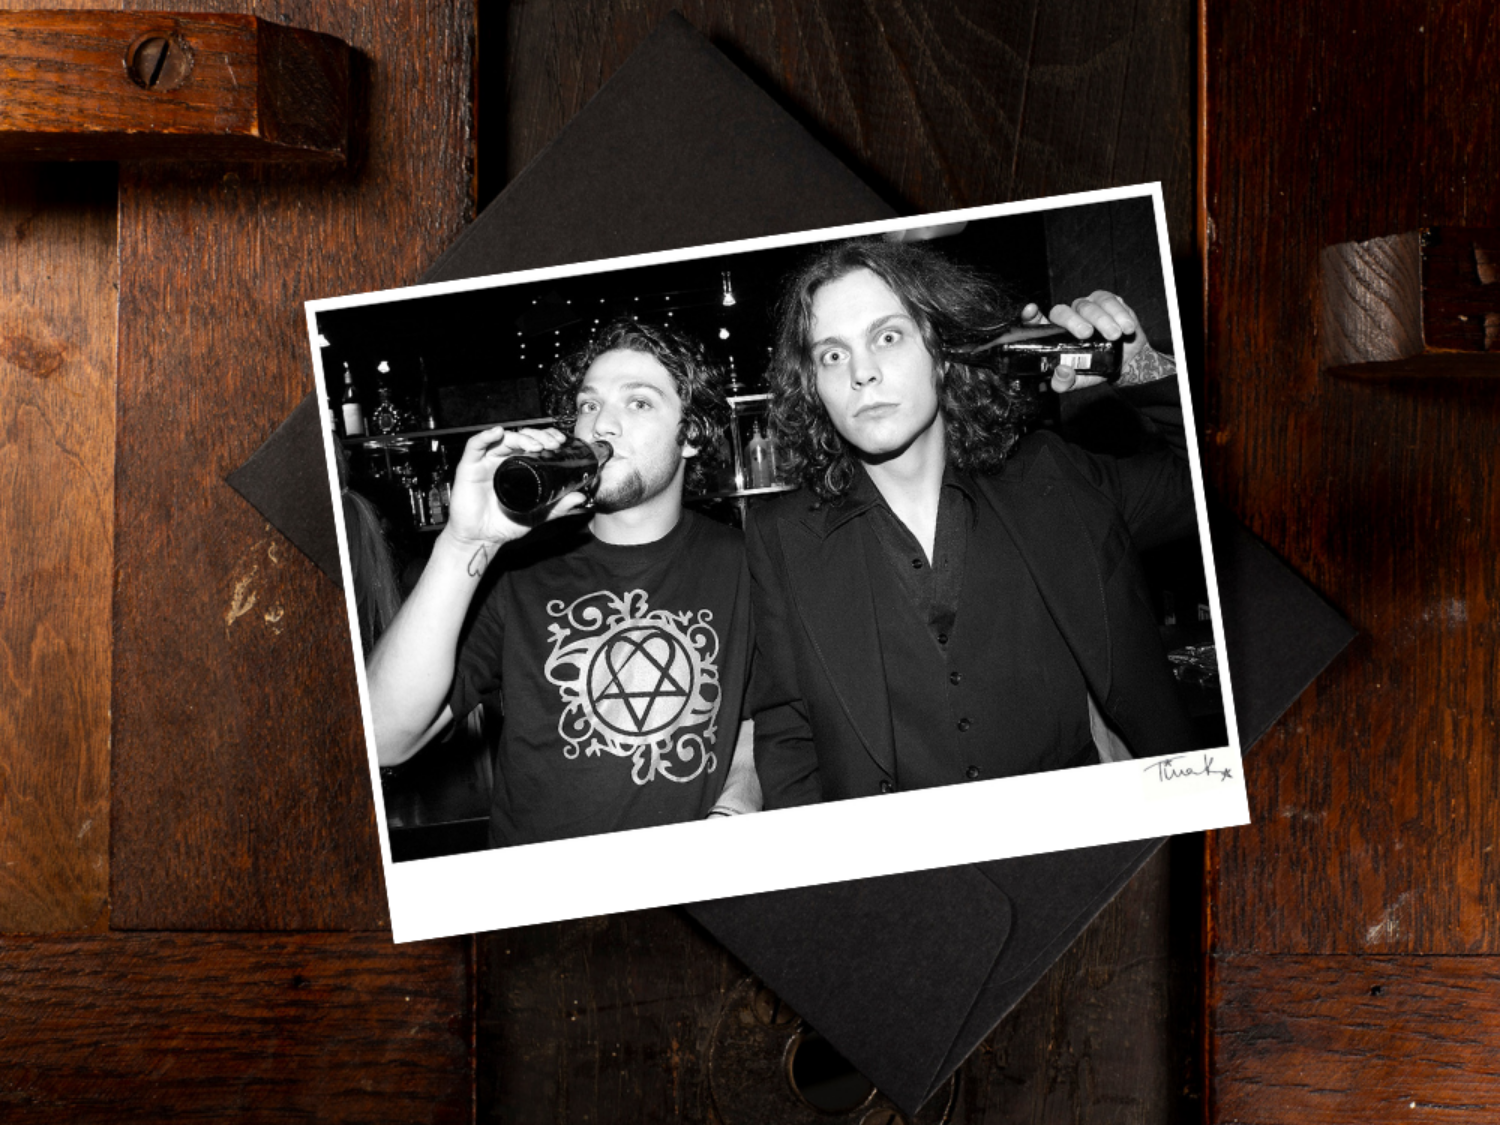 Ville Valo, HIM and Bam Margera (A6 Greeting Card)